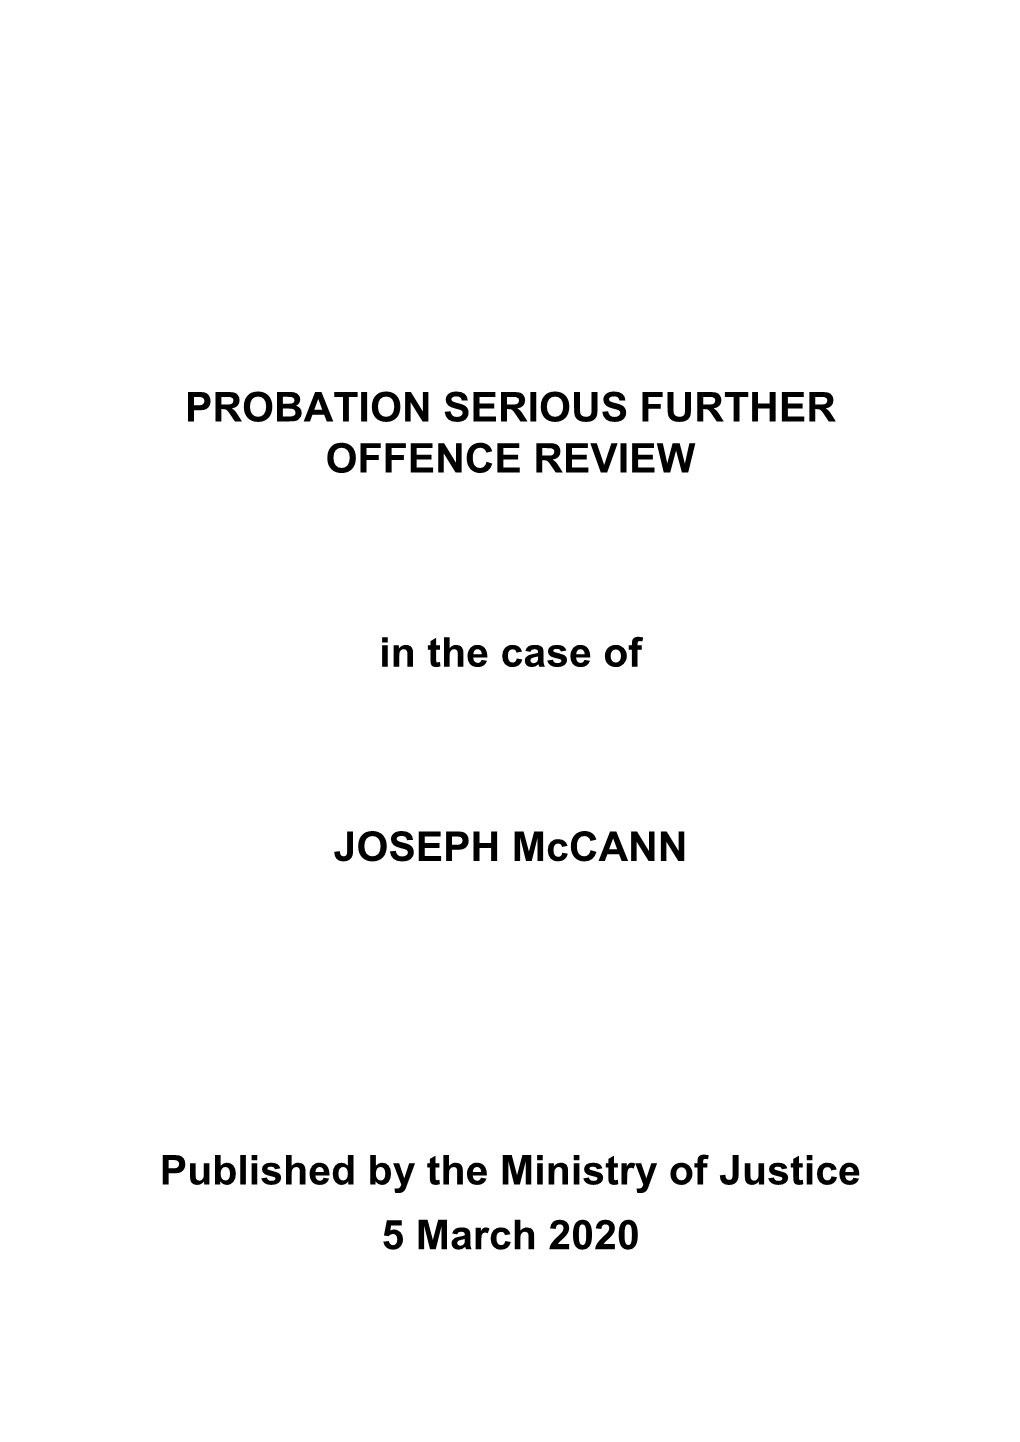 Probation Serious Further Offence Review: Joseph Mccann